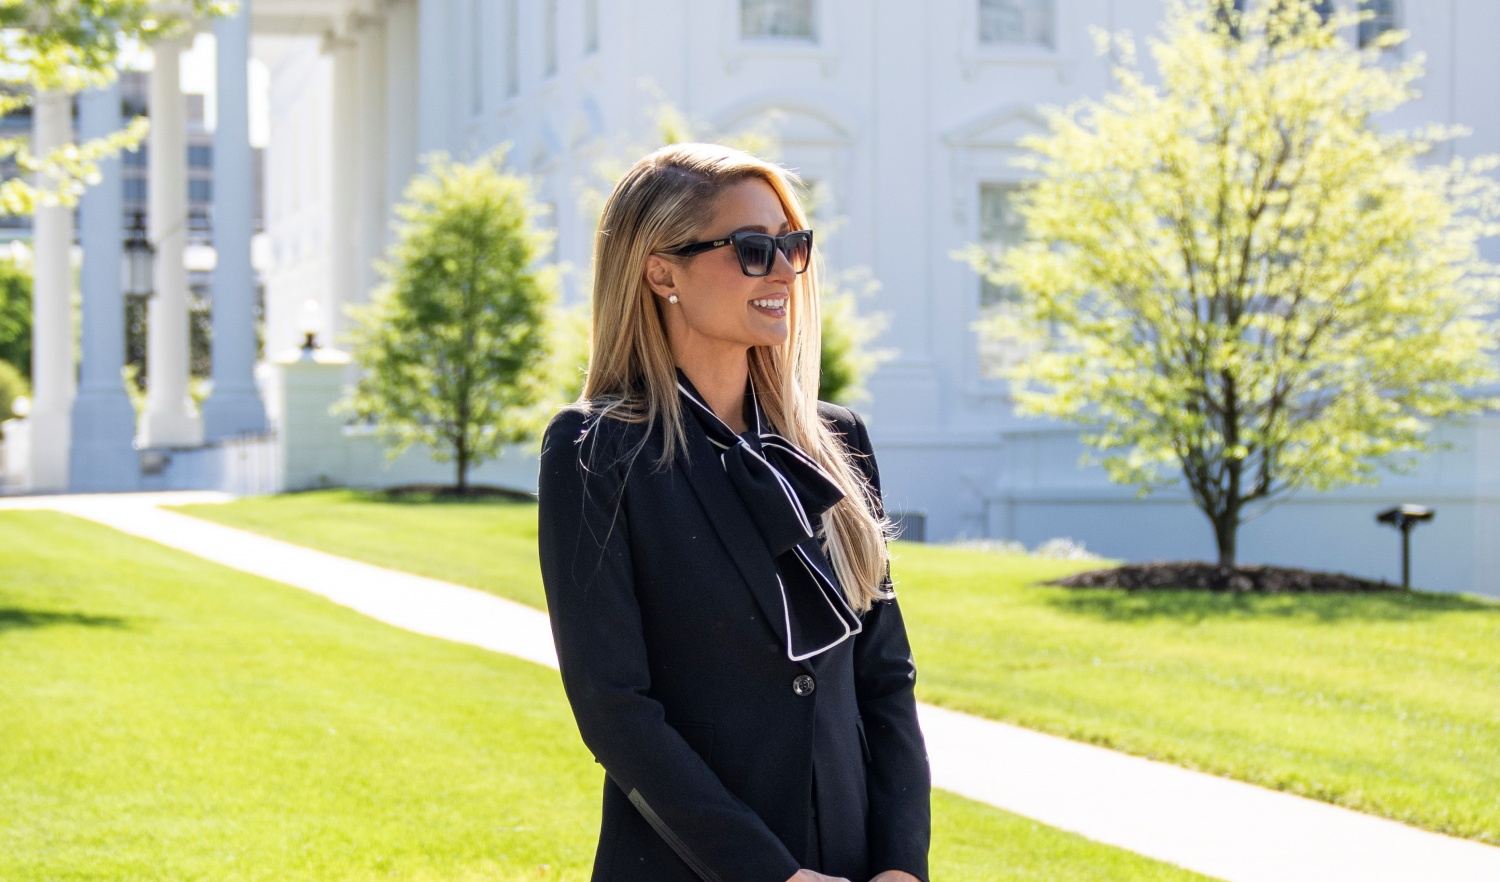 Paris Hilton Meets With Administration Officials At The White House